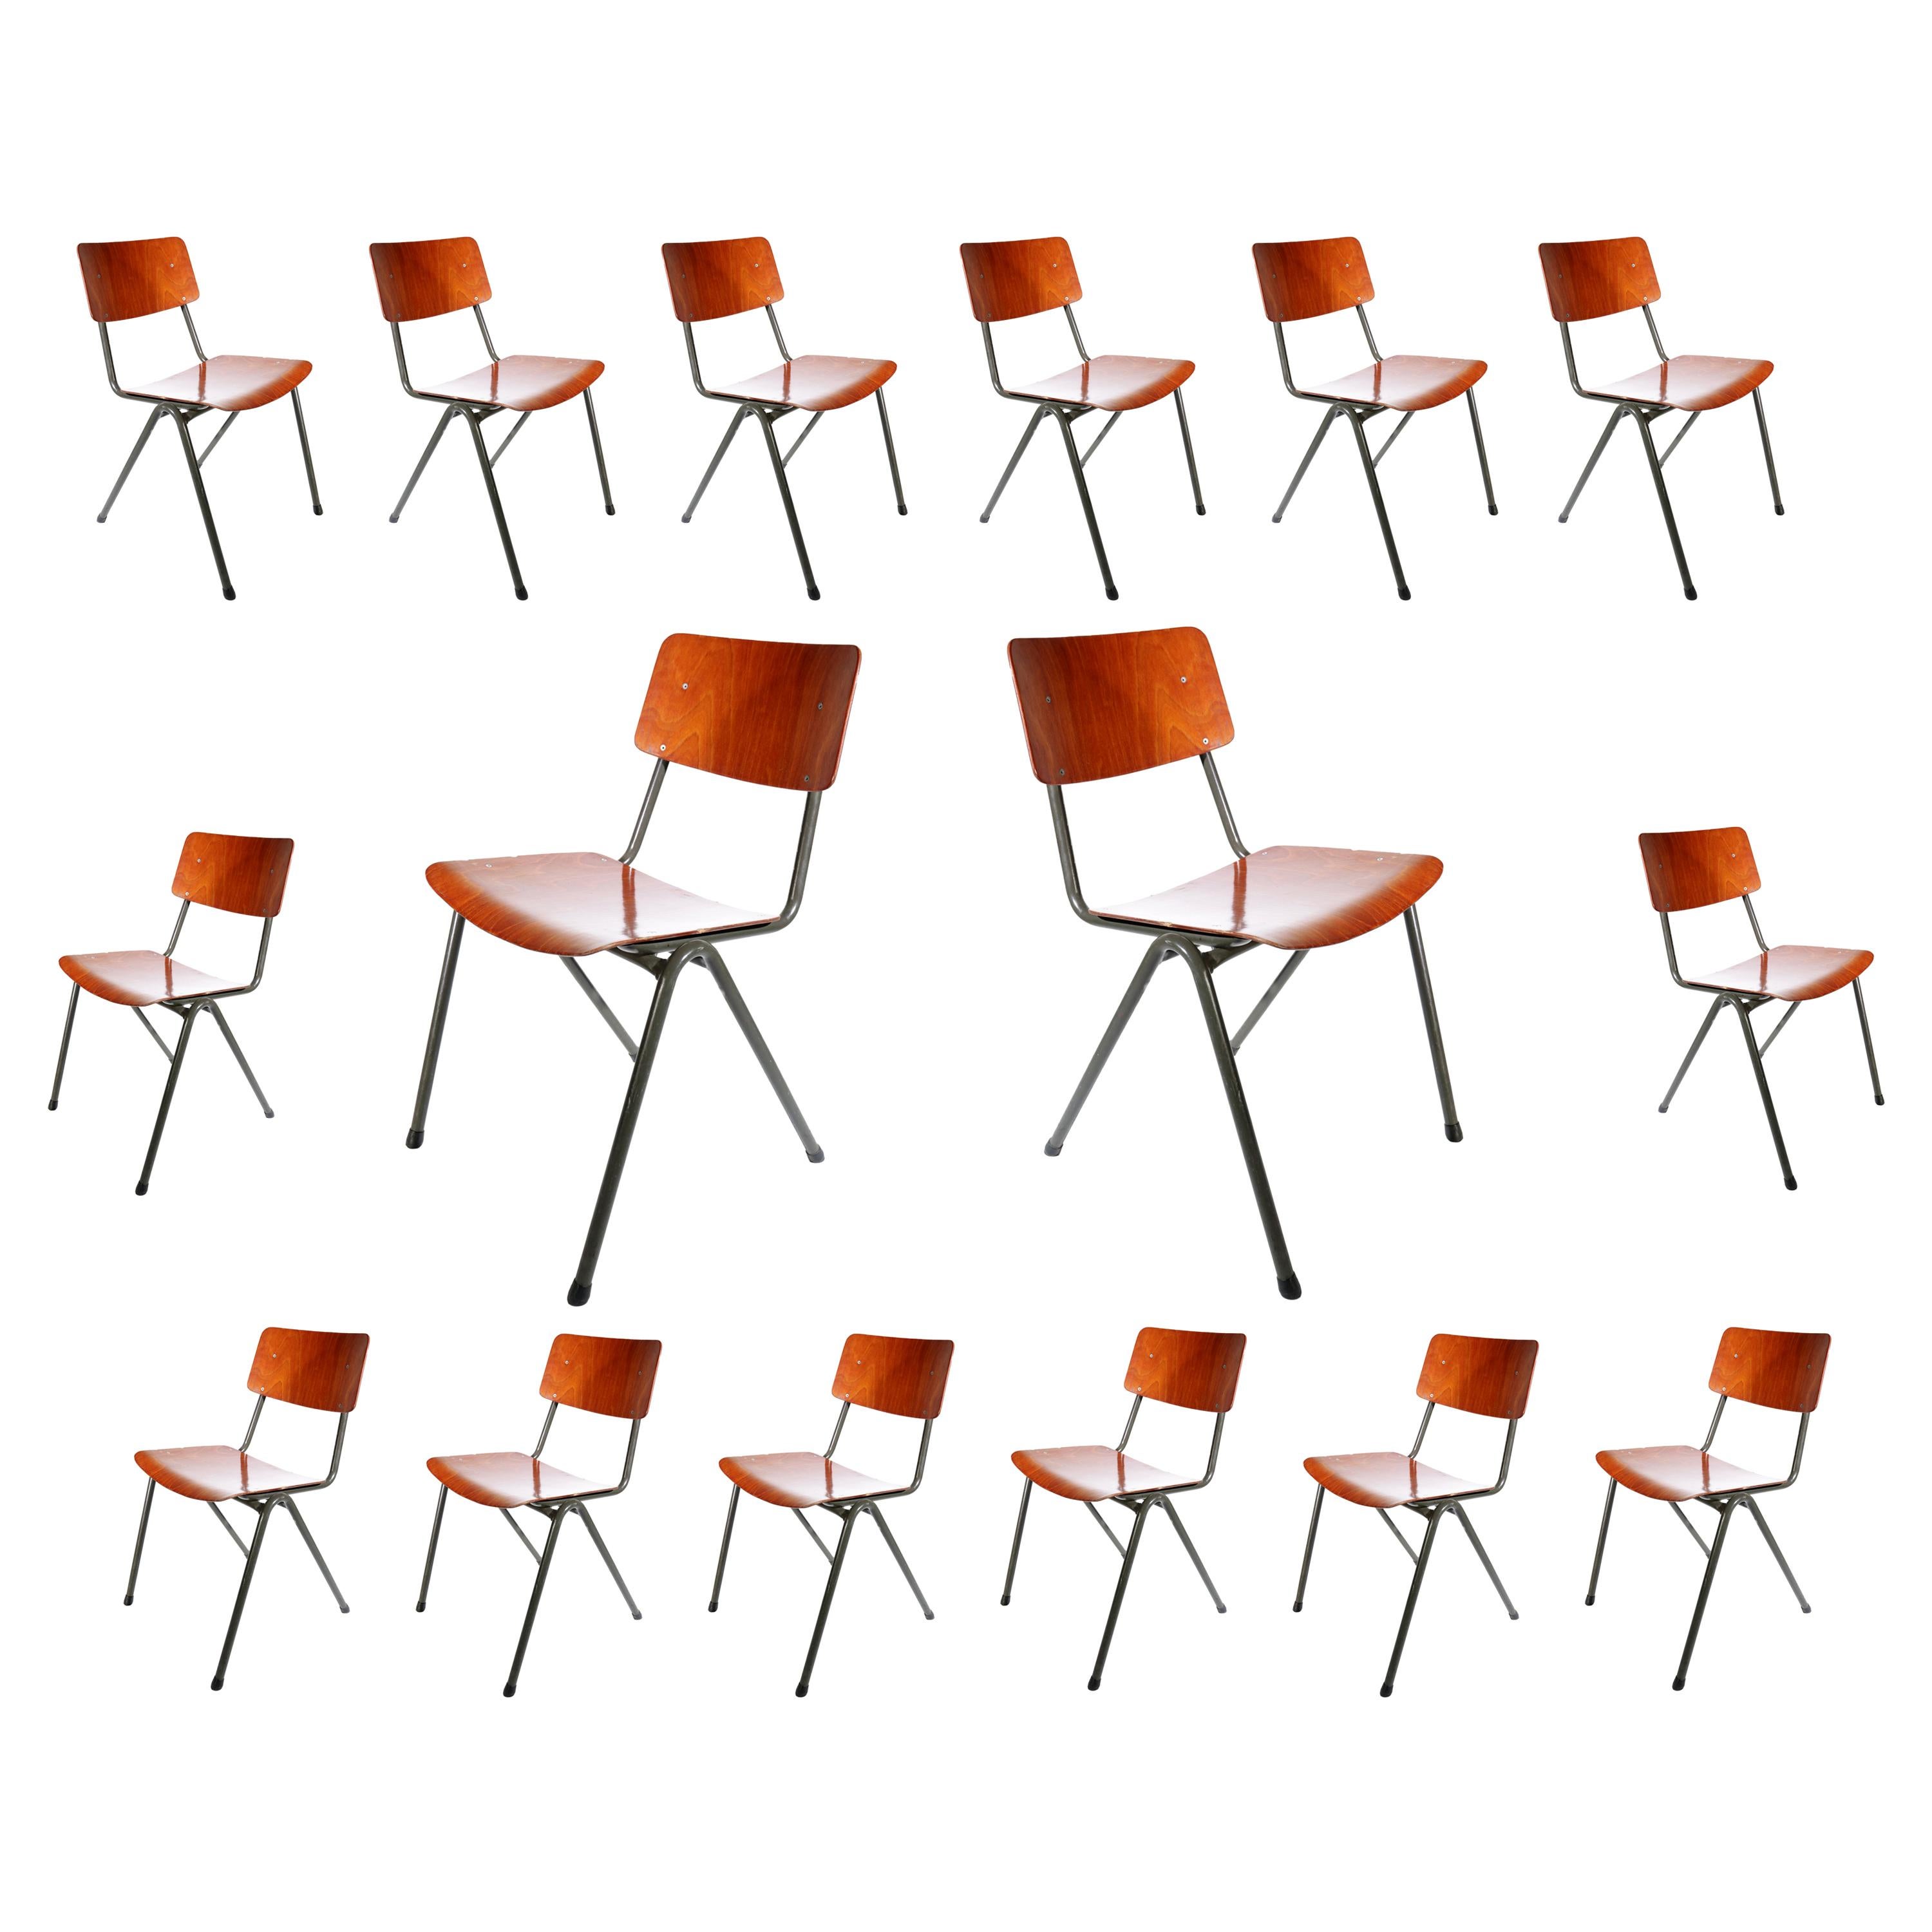 Industrial Design Eromes Pagholz Stacking Dining Chairs V-Shape Legs